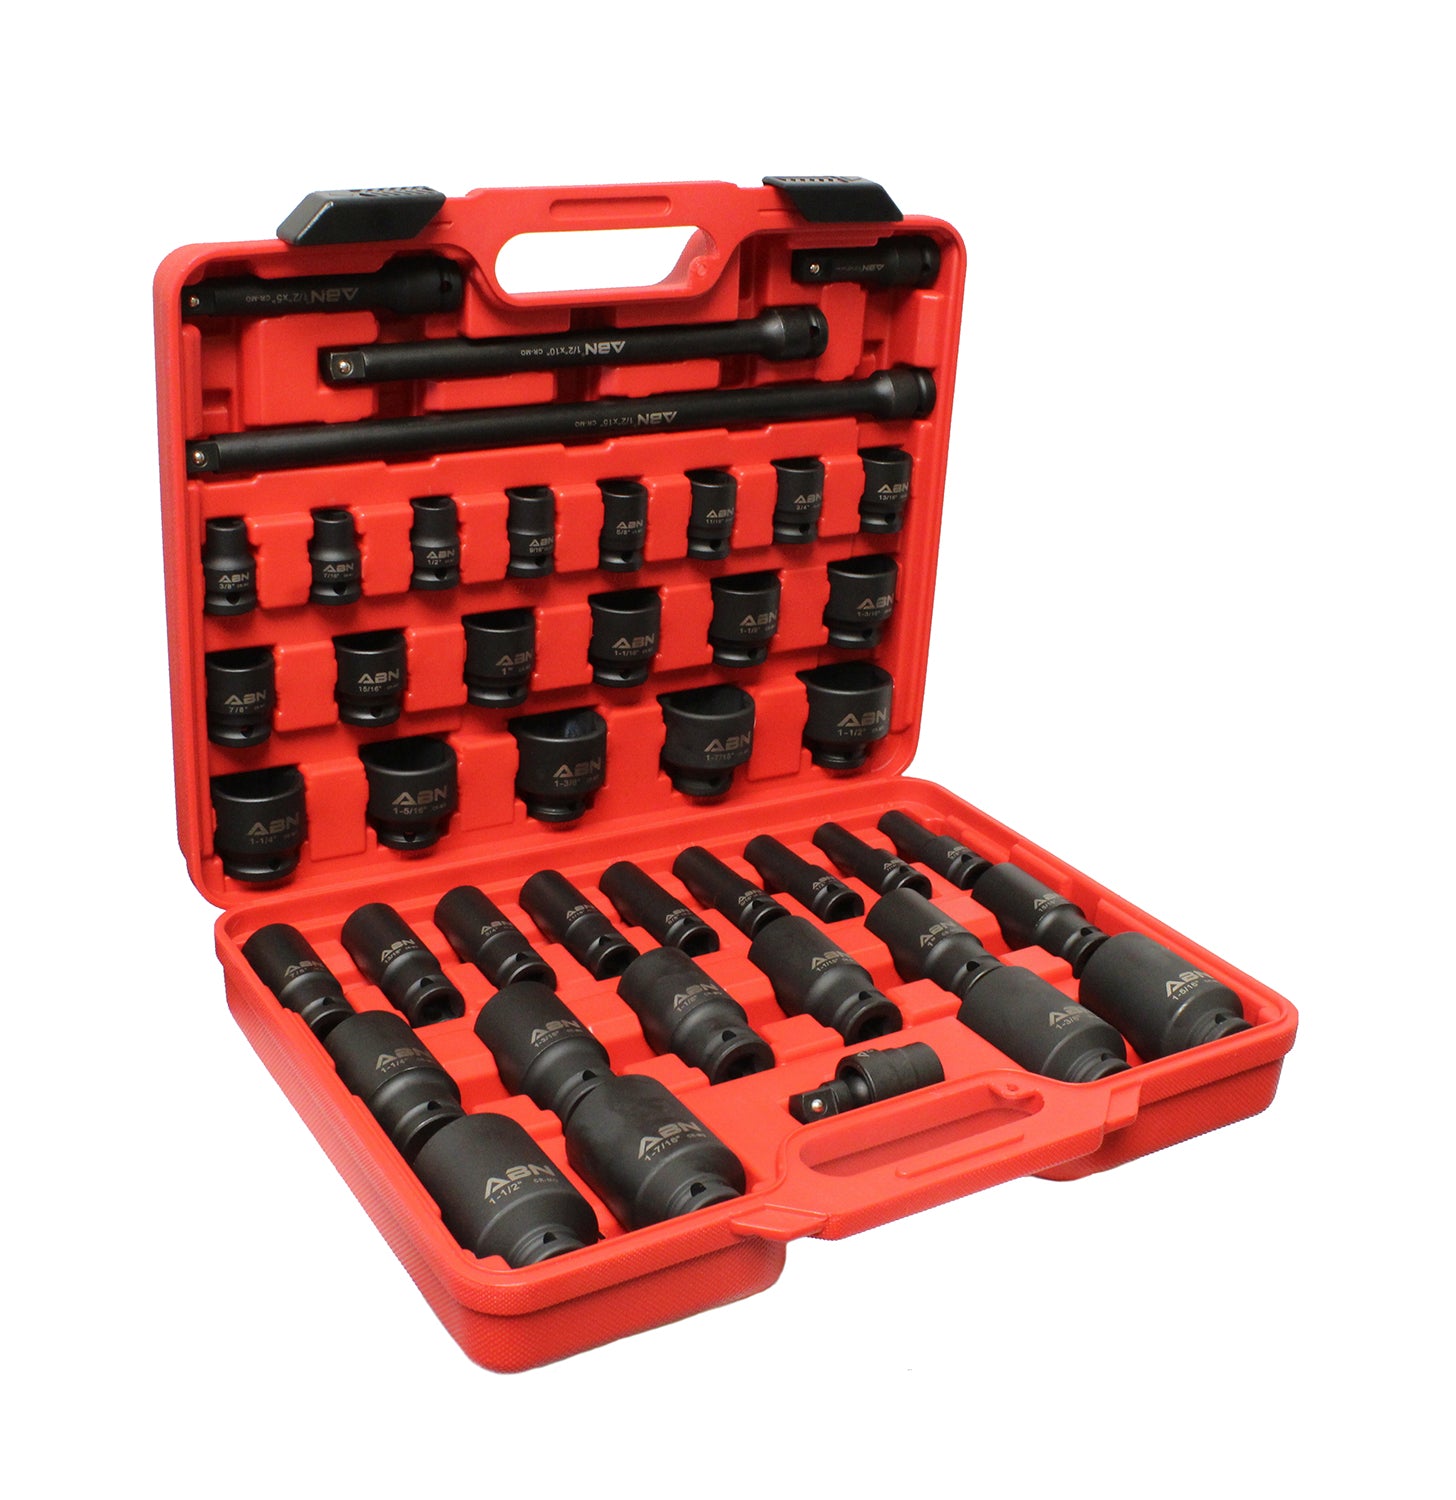 1/2" Inch Drive SAE Impact Socket Set with Extensions & Swivel Joint